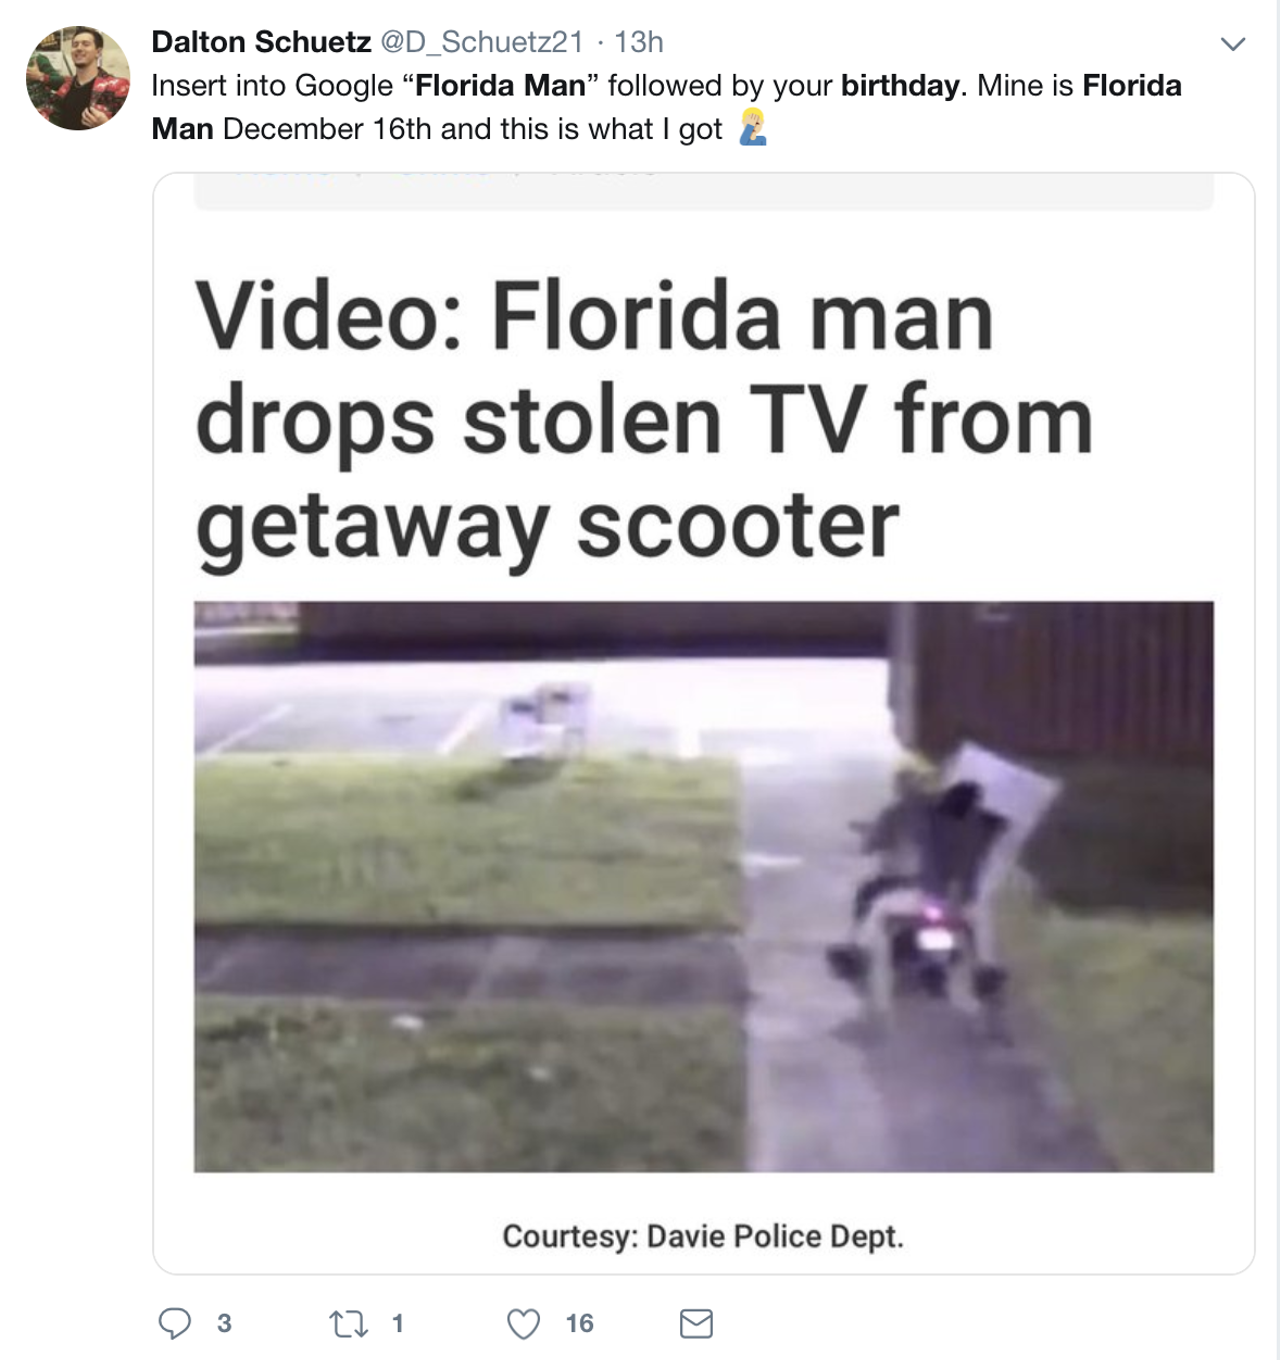 The most ridiculous tweets from the viral 'Florida Man Birthday Challenge'